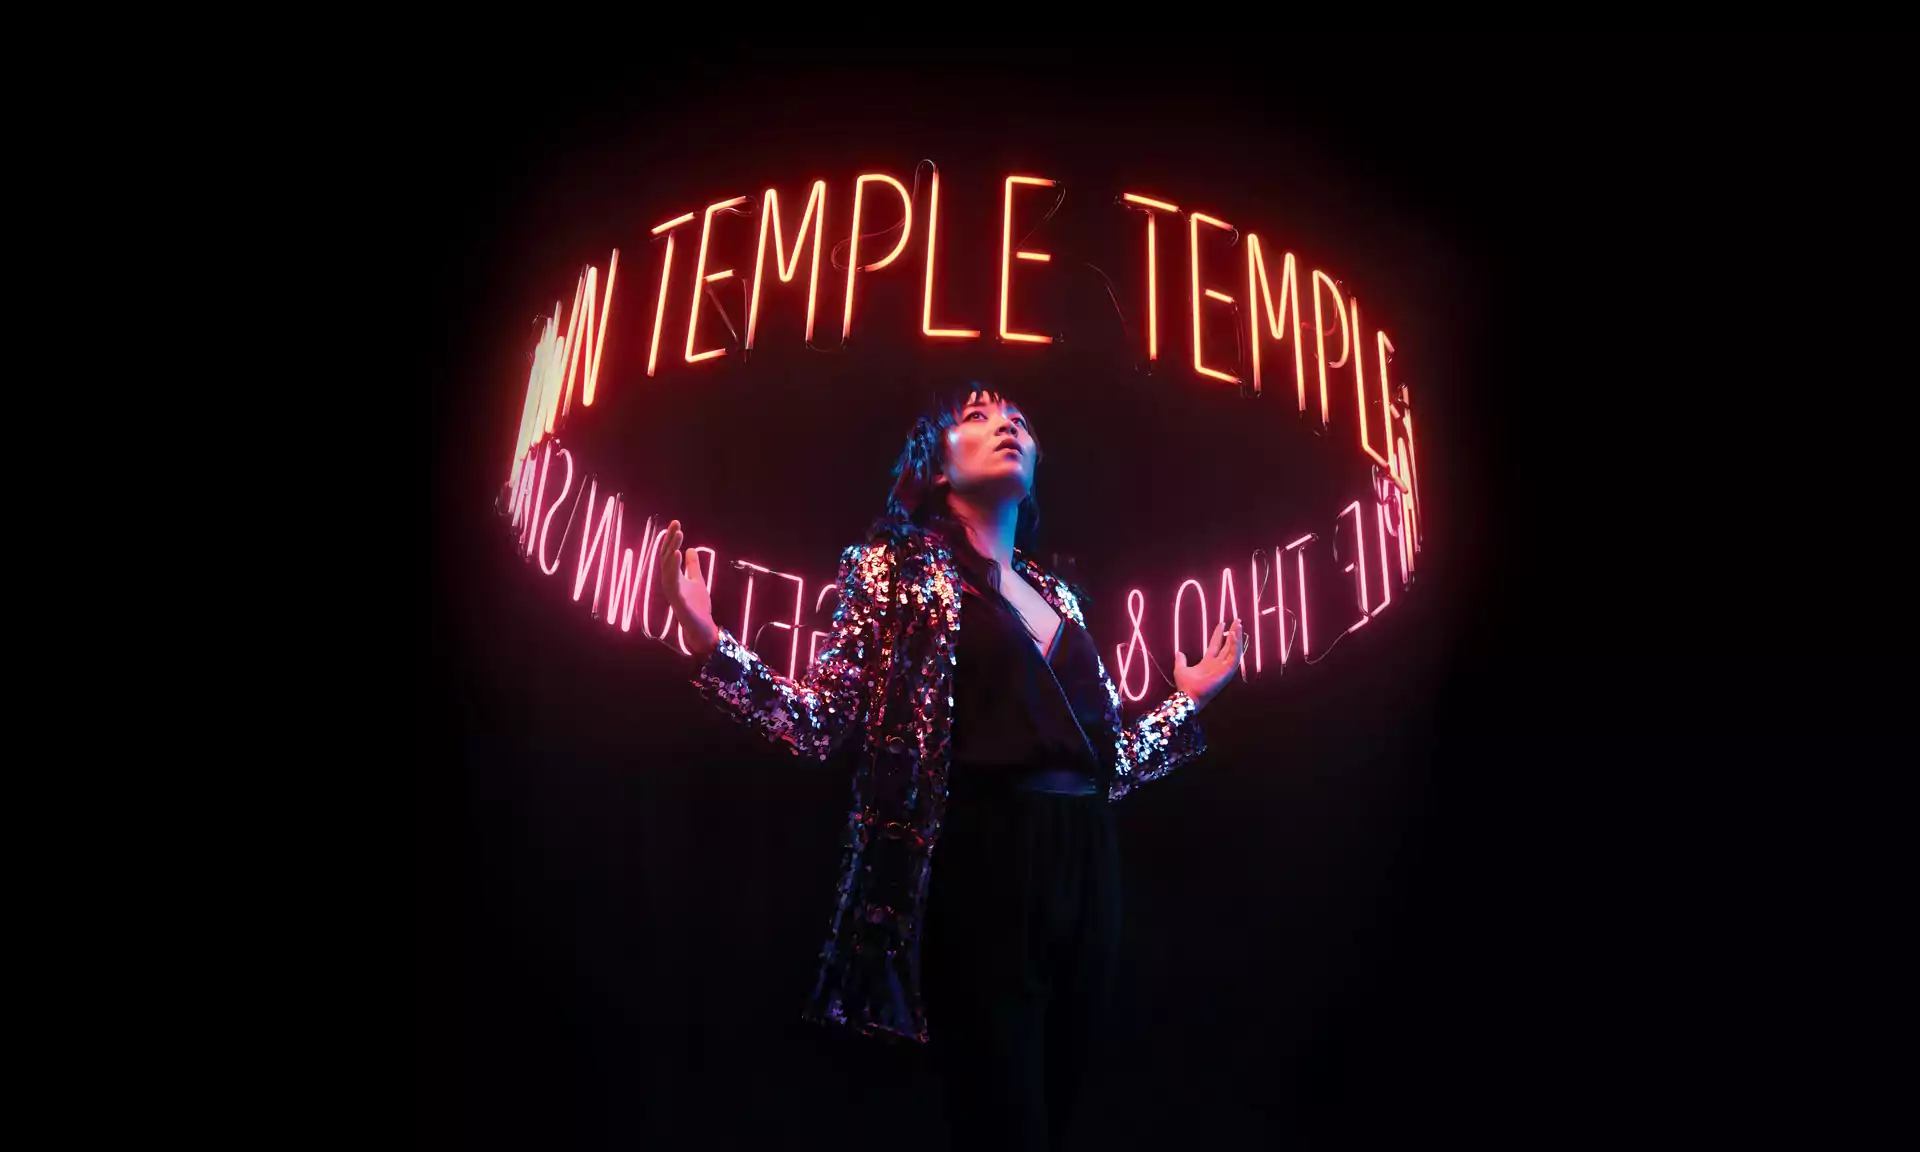 Thao standing in the dark, with a halo of neon lighting that spells out temple